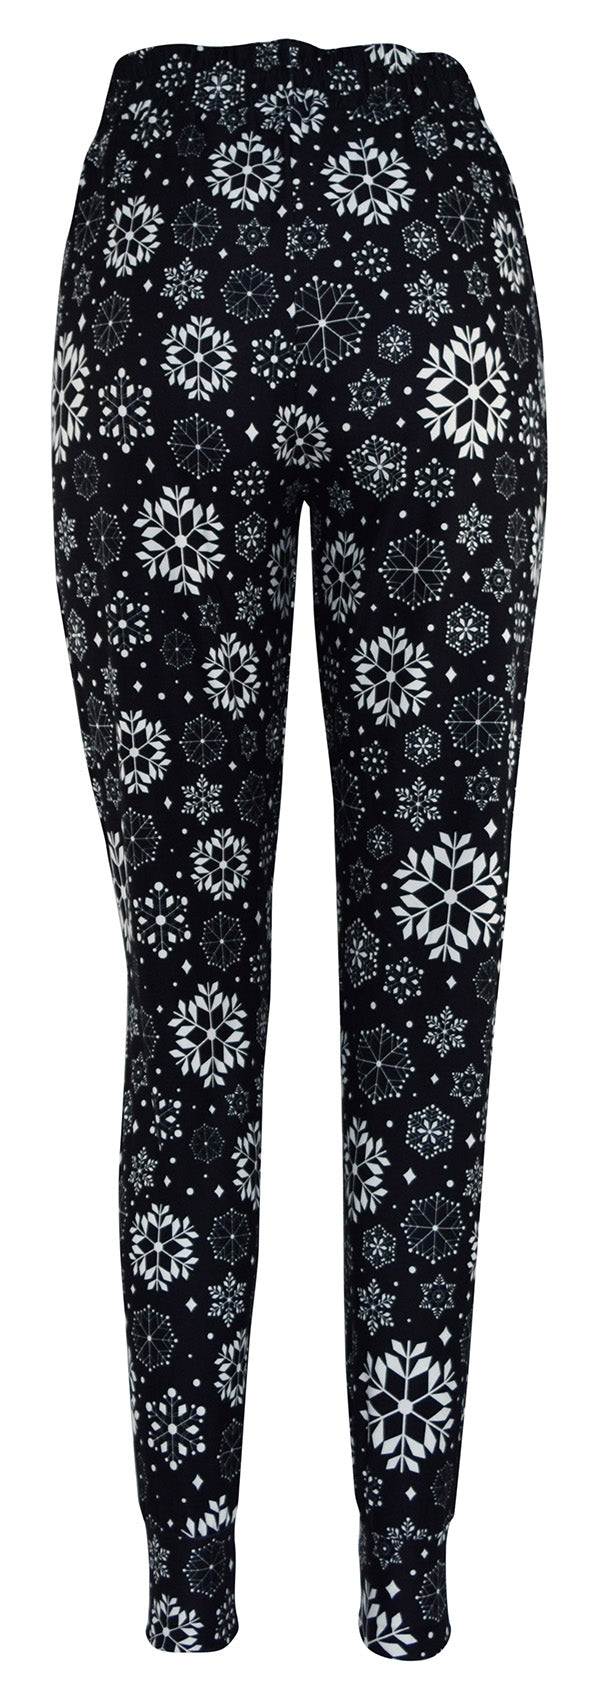 Snow Is Falling Lejoggers-Joggers